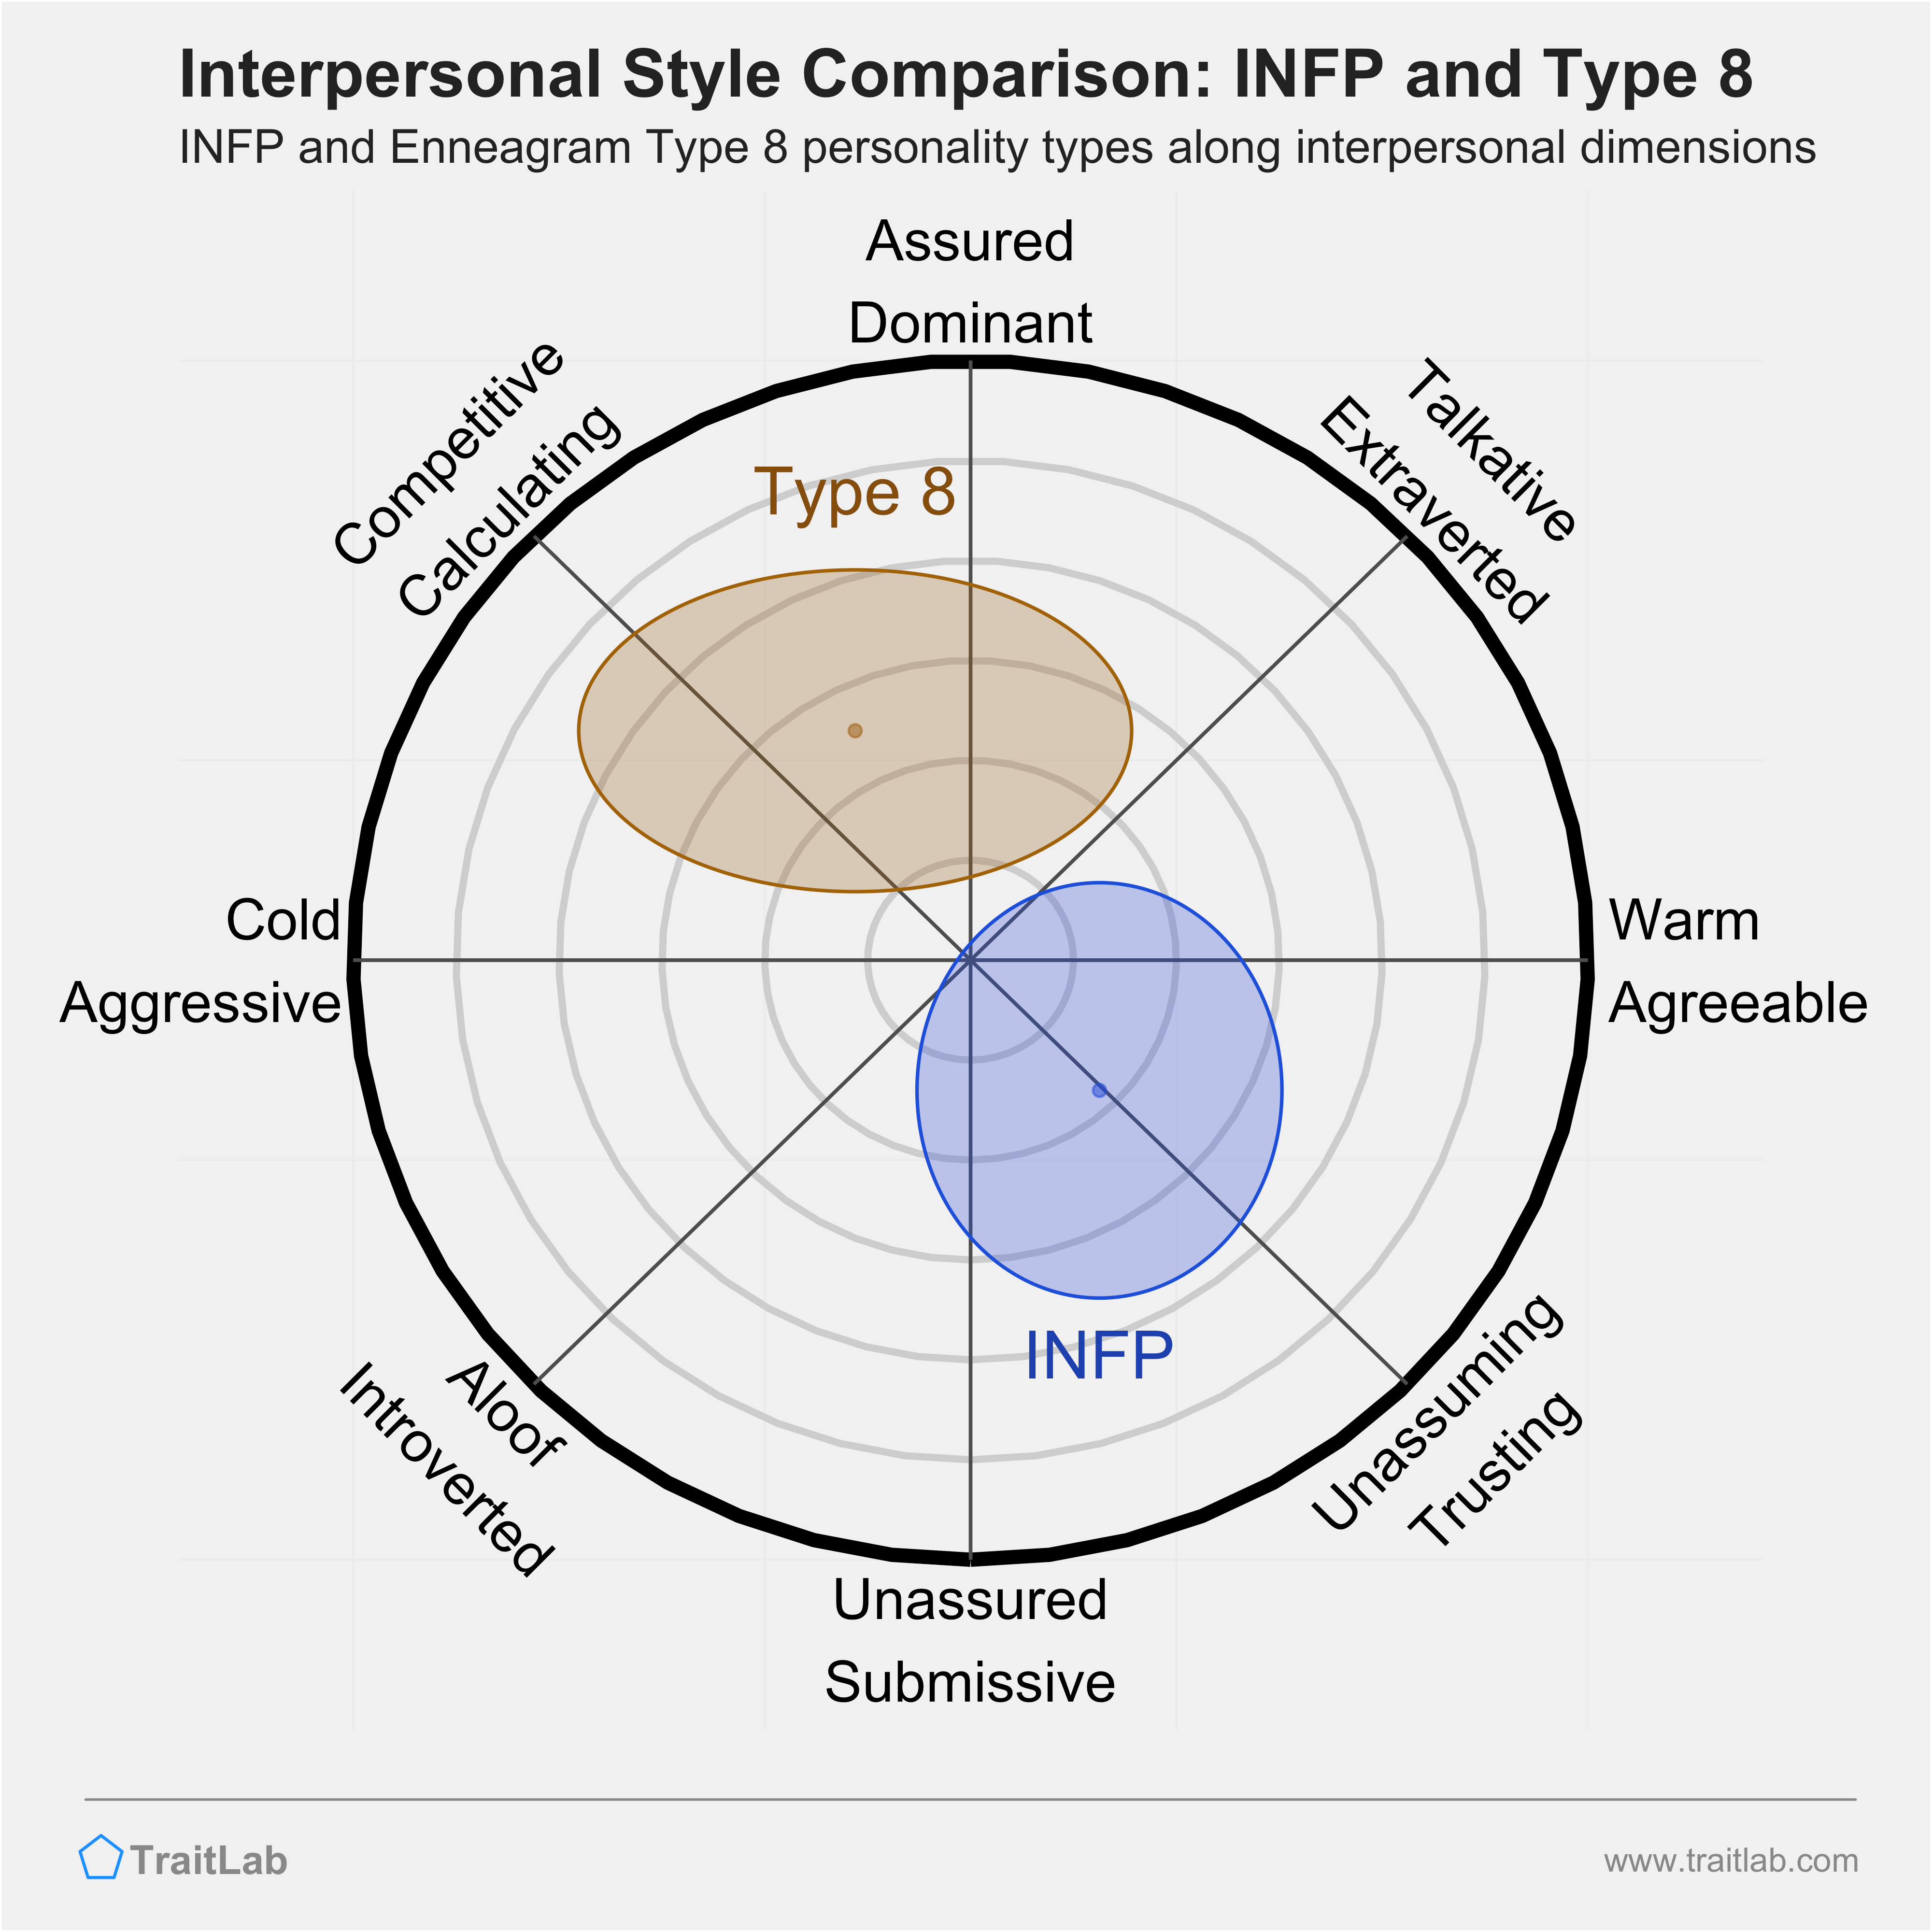 Enneagram INFP and Type 8 comparison across interpersonal dimensions